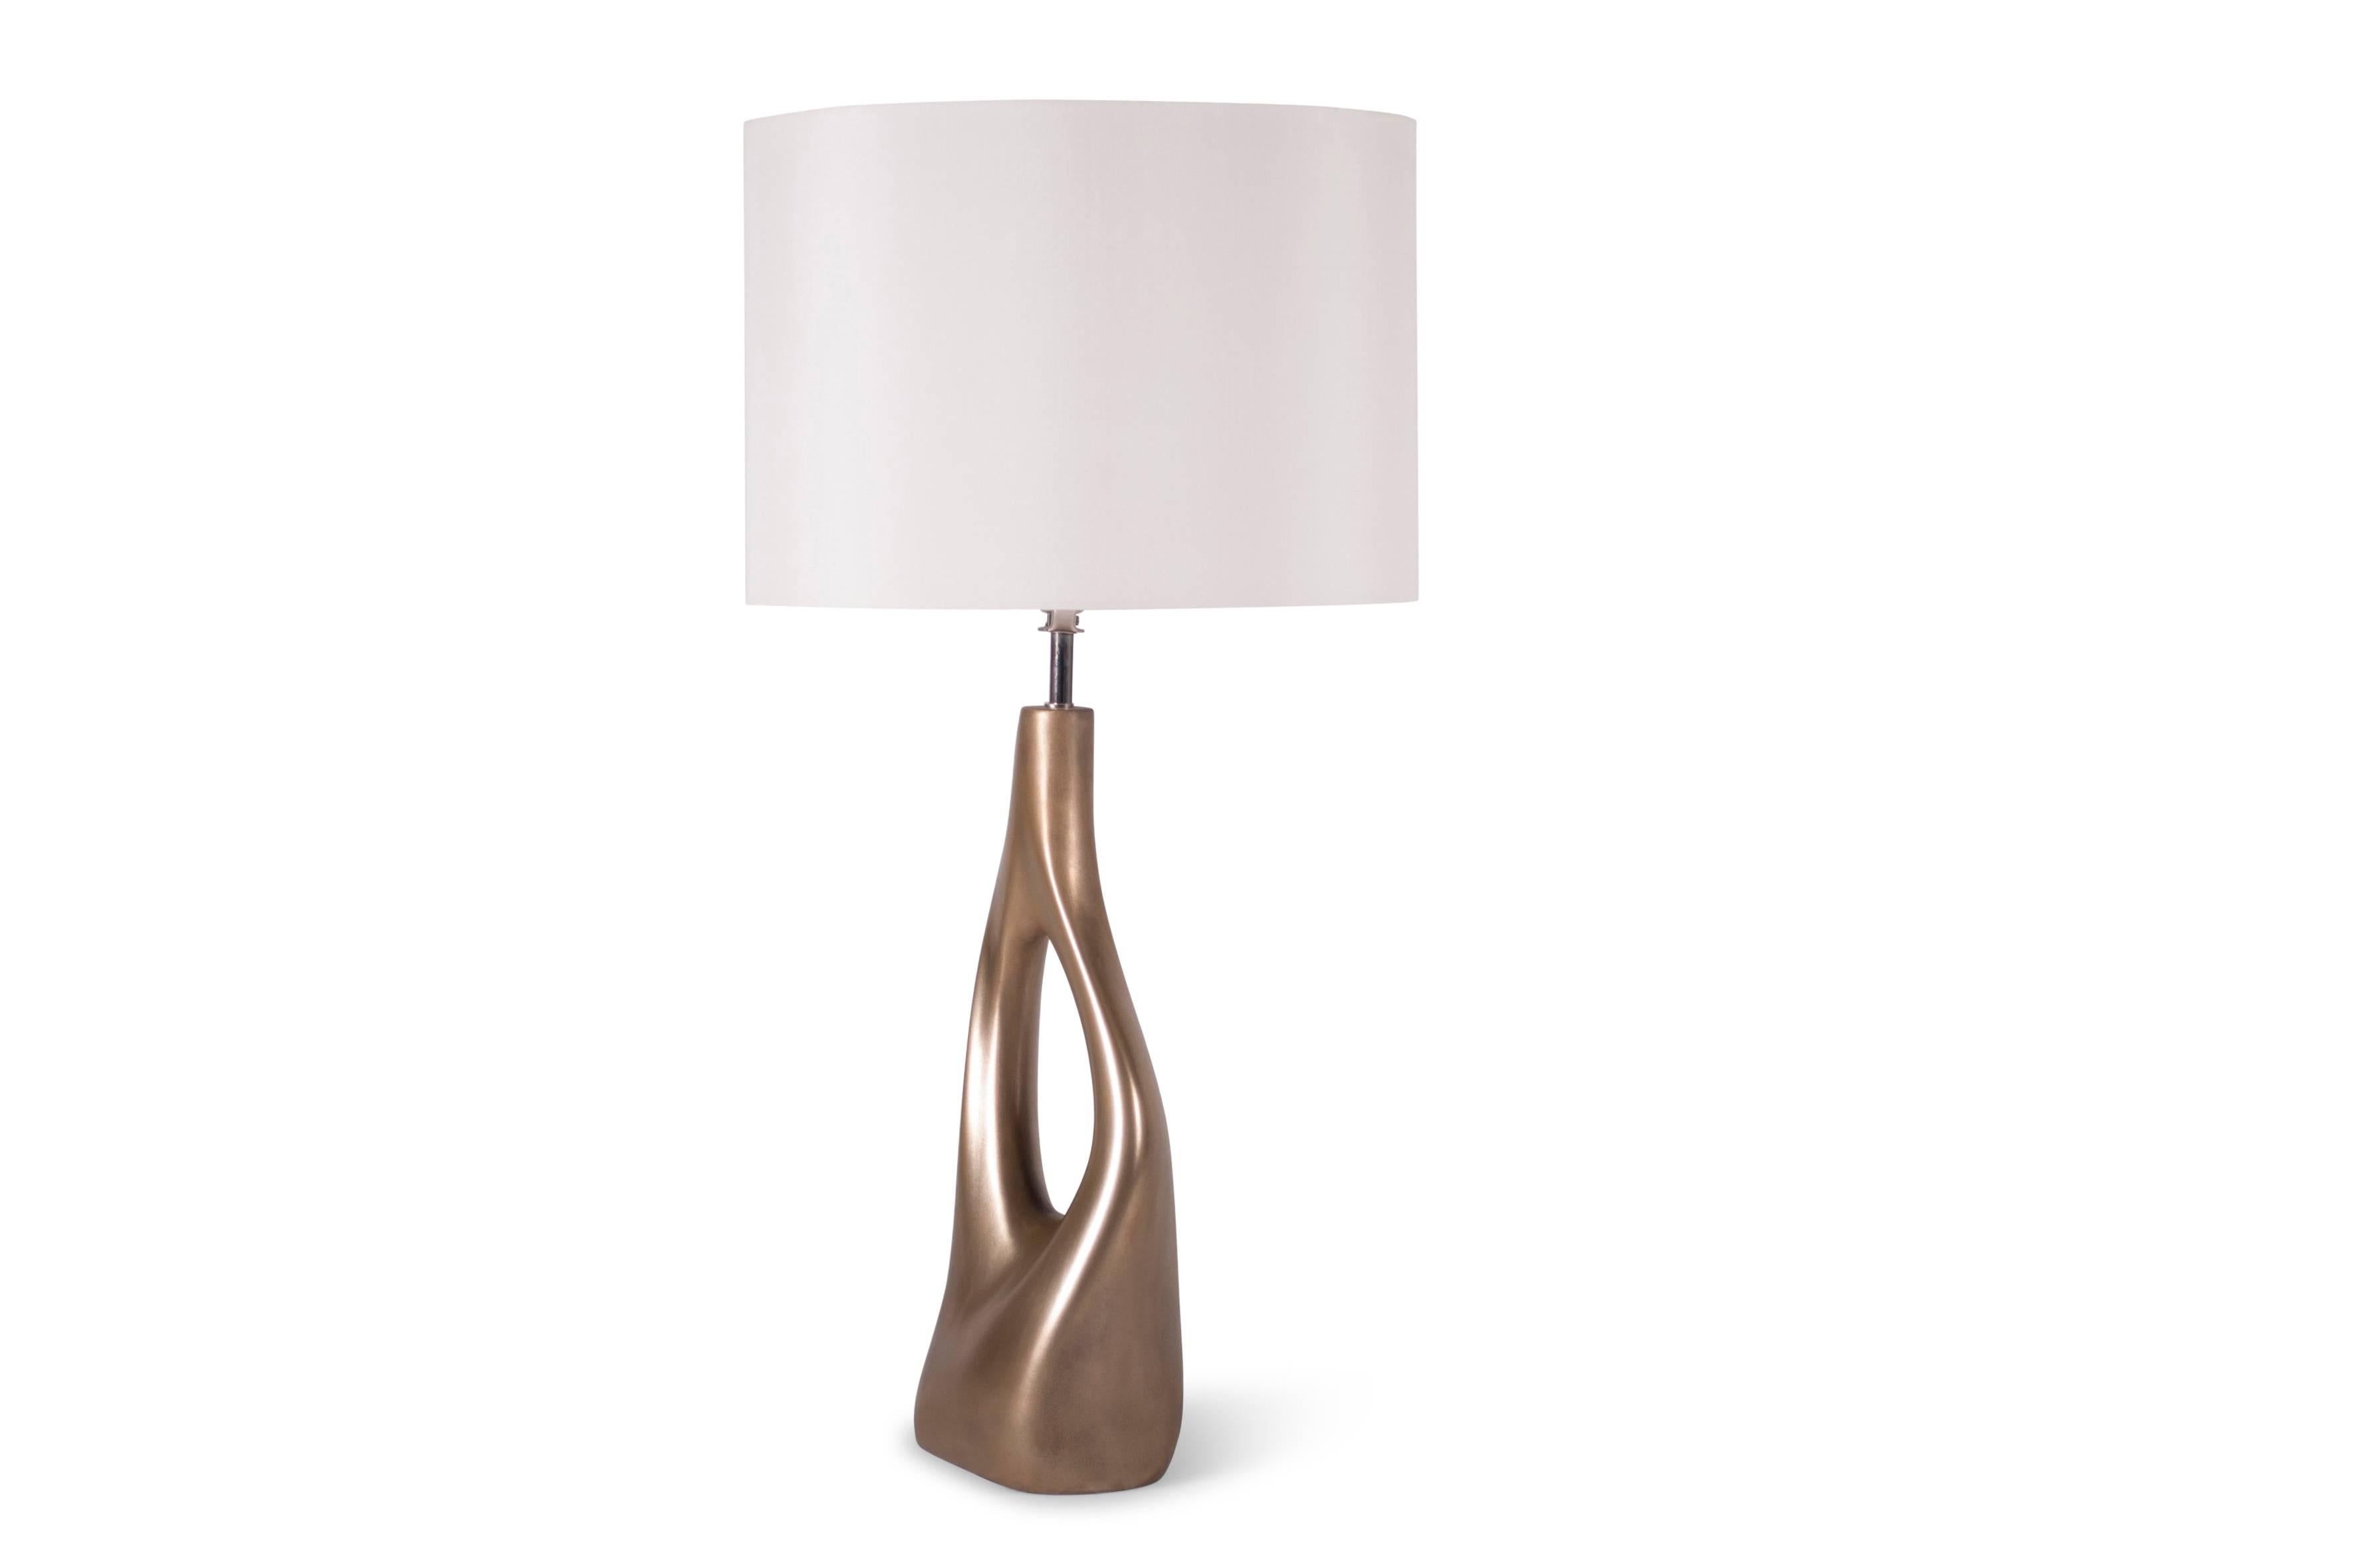 sculptural table lamp is made from MDF with Cold Metal finish. Color: Gold 
Dimension base: 16